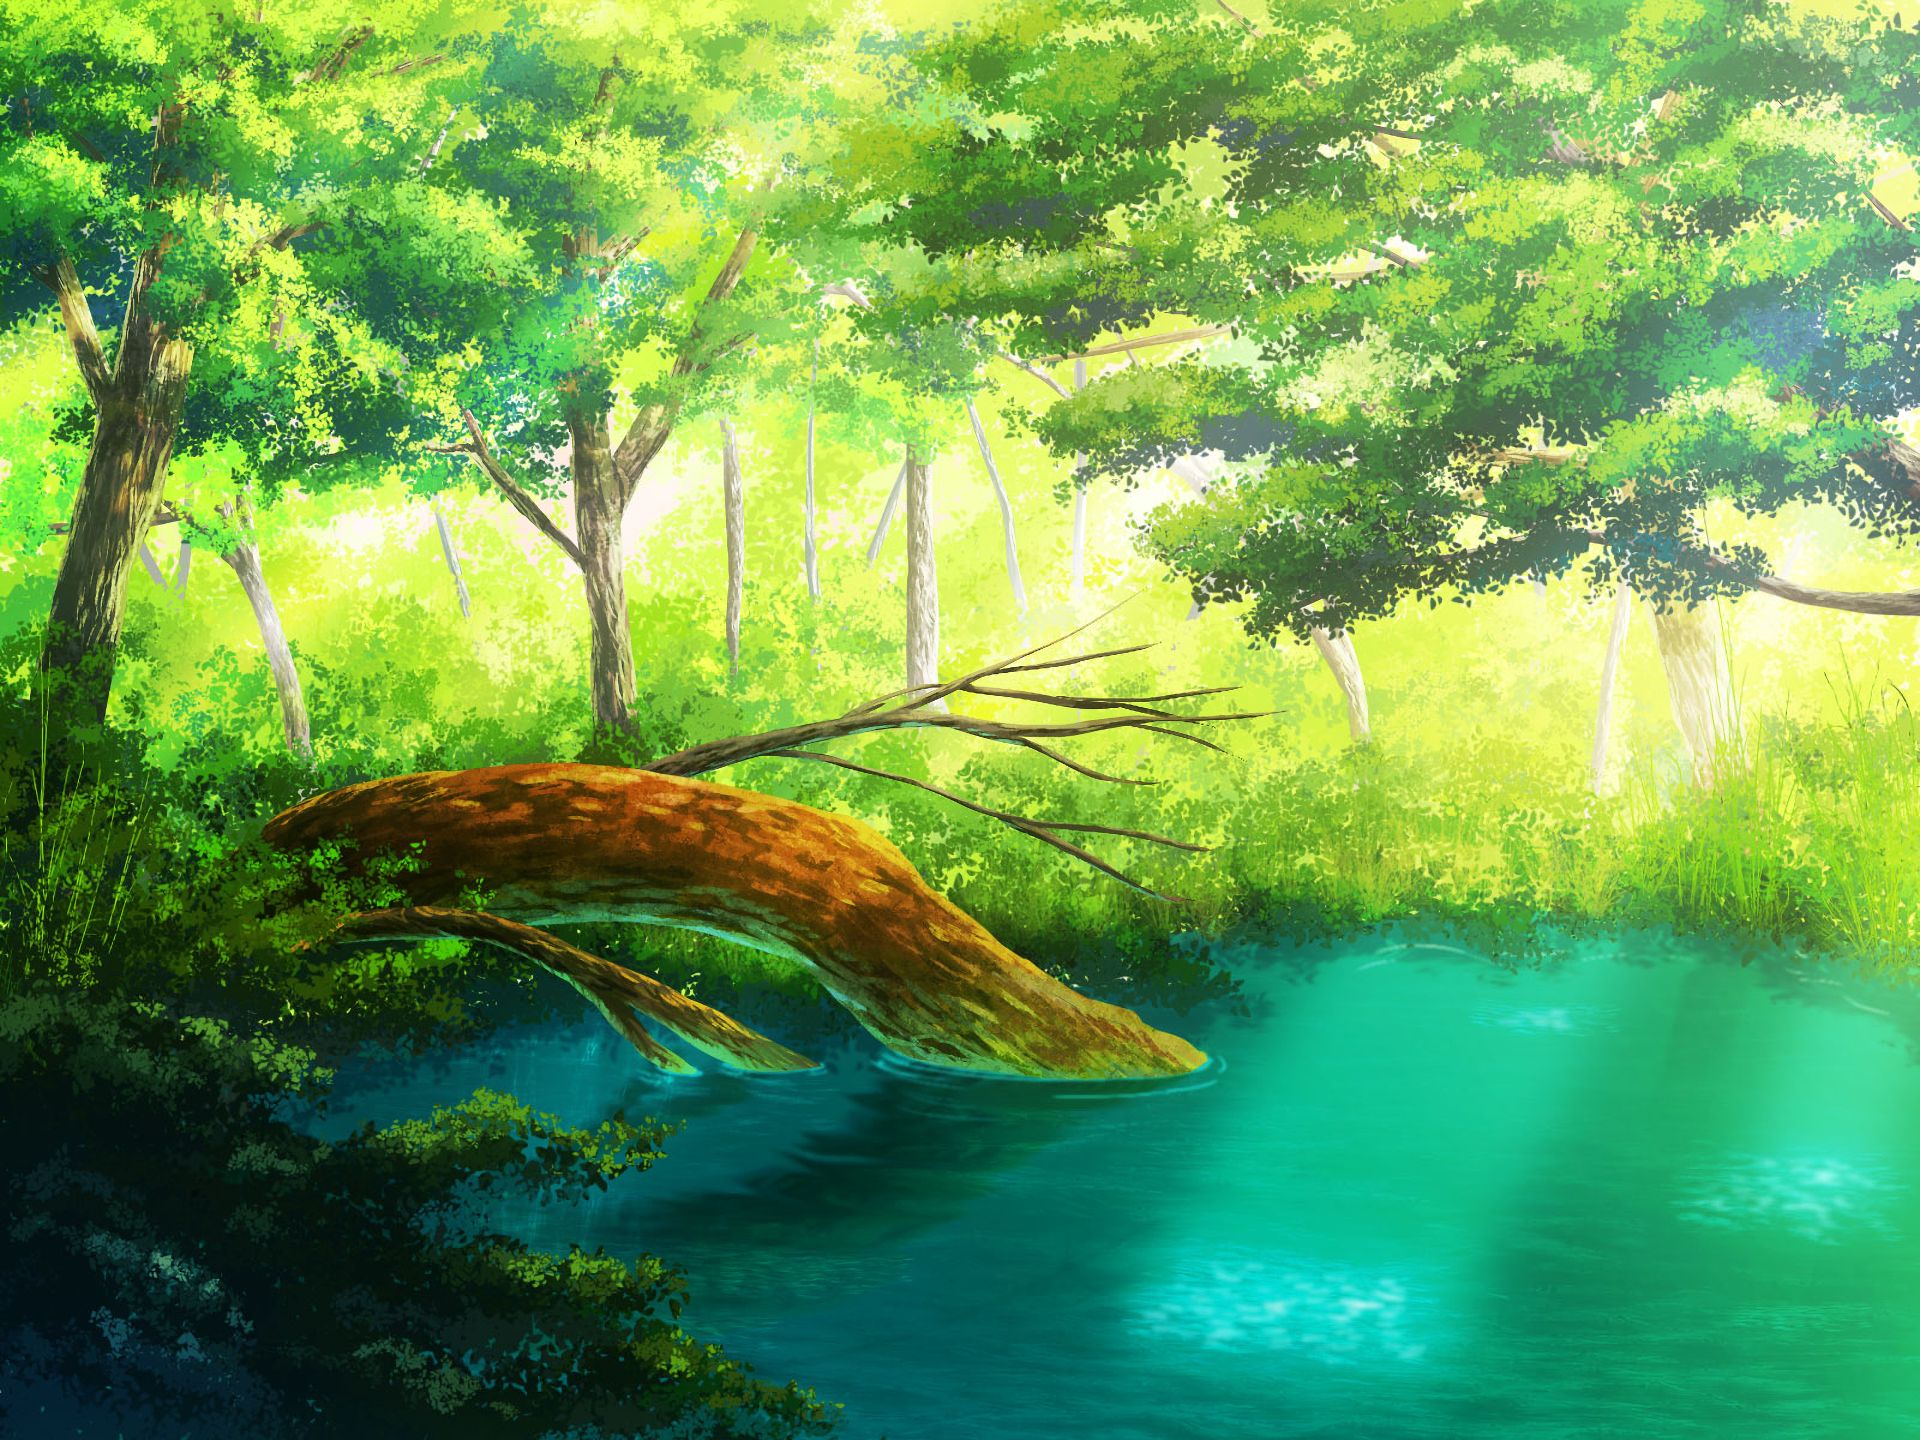 anime scenery forest